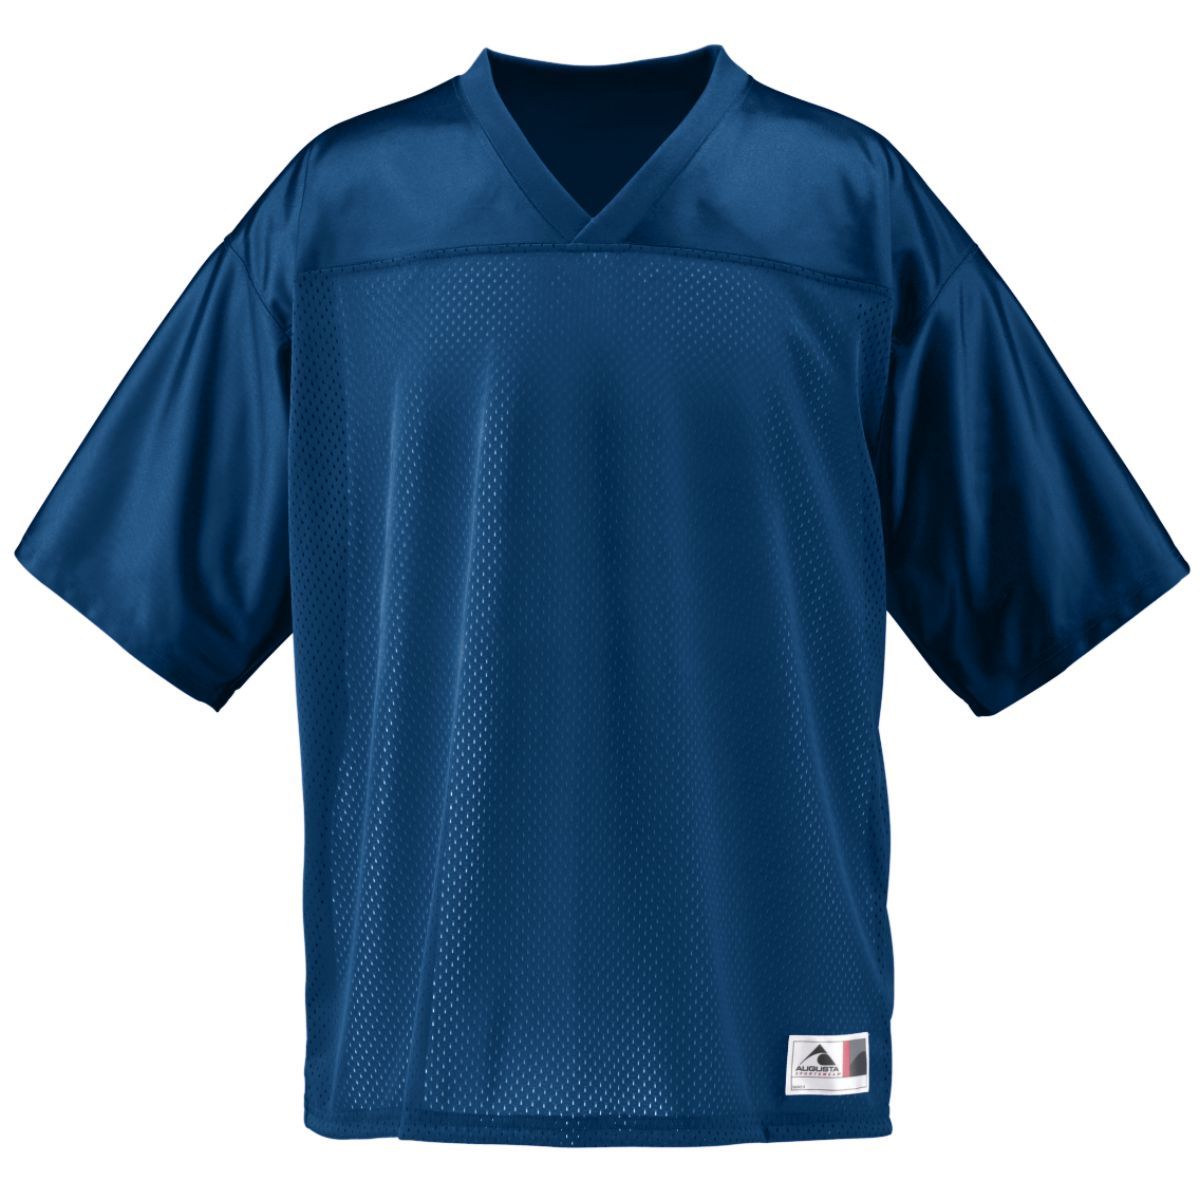 Augusta Sportswear Youth Stadium Replica Jersey in Navy  -Part of the Youth, Youth-Jersey, Augusta-Products, Football, Shirts, All-Sports, All-Sports-1 product lines at KanaleyCreations.com